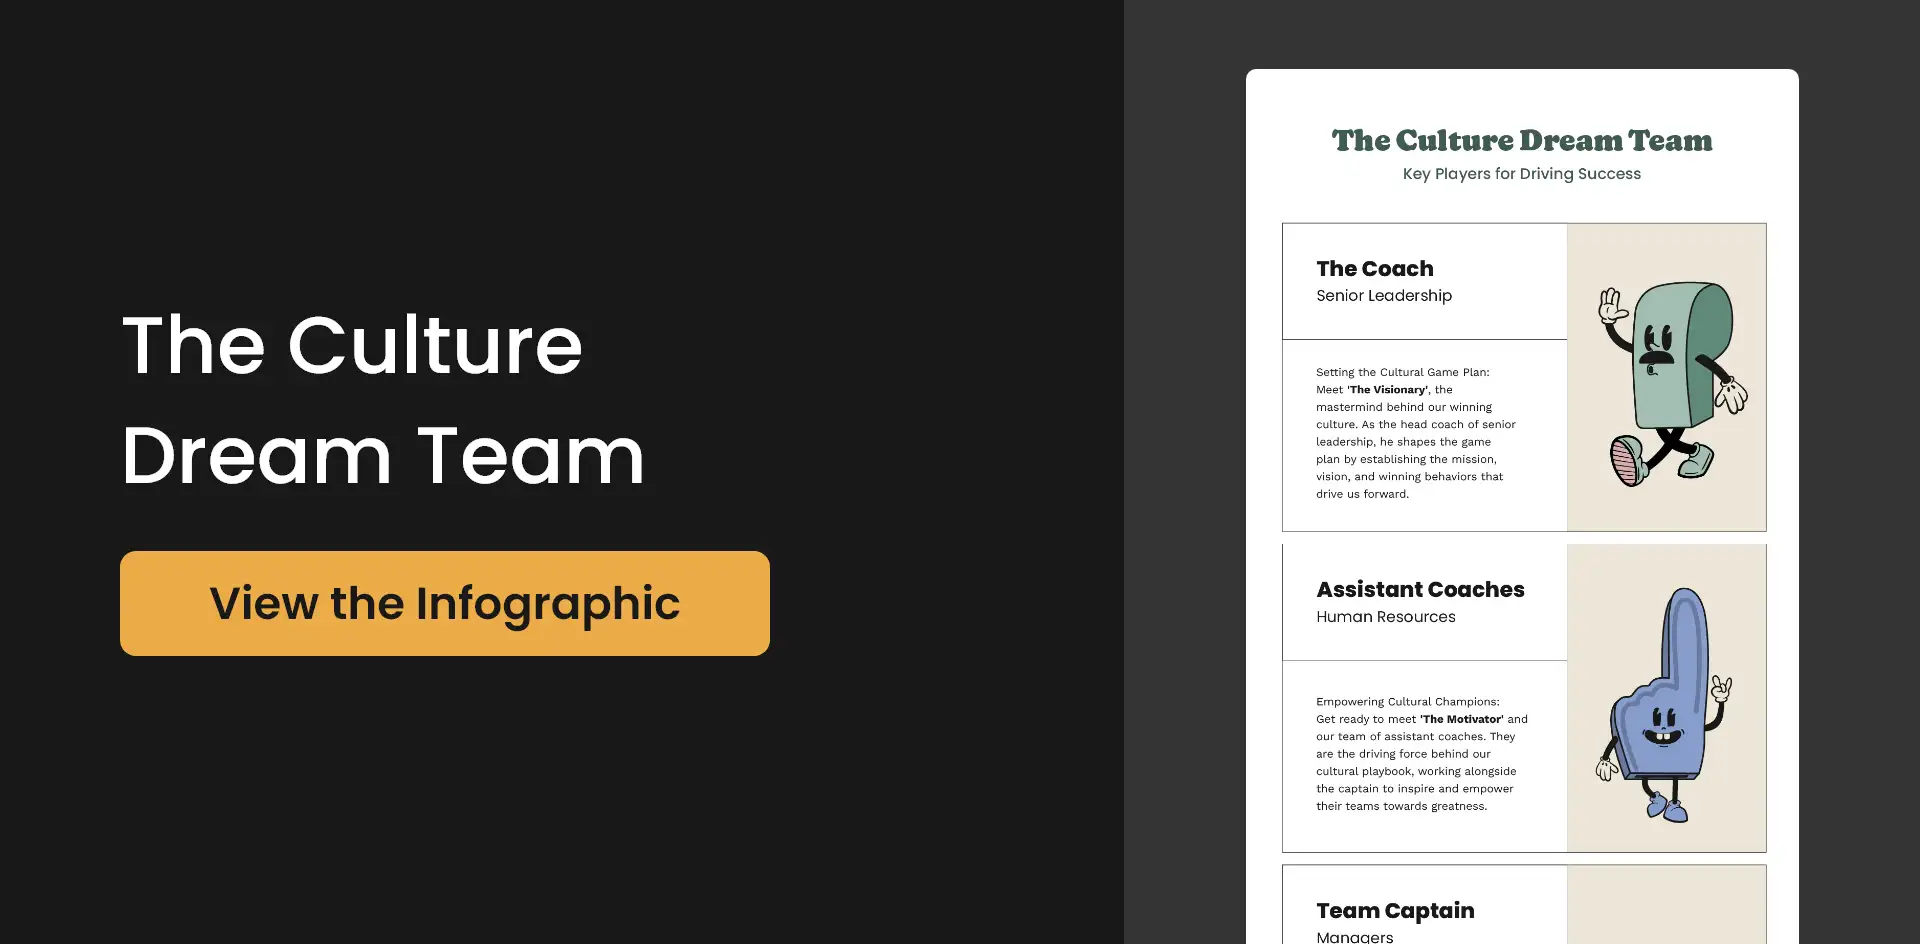 Cover photo for culture dream team infographic